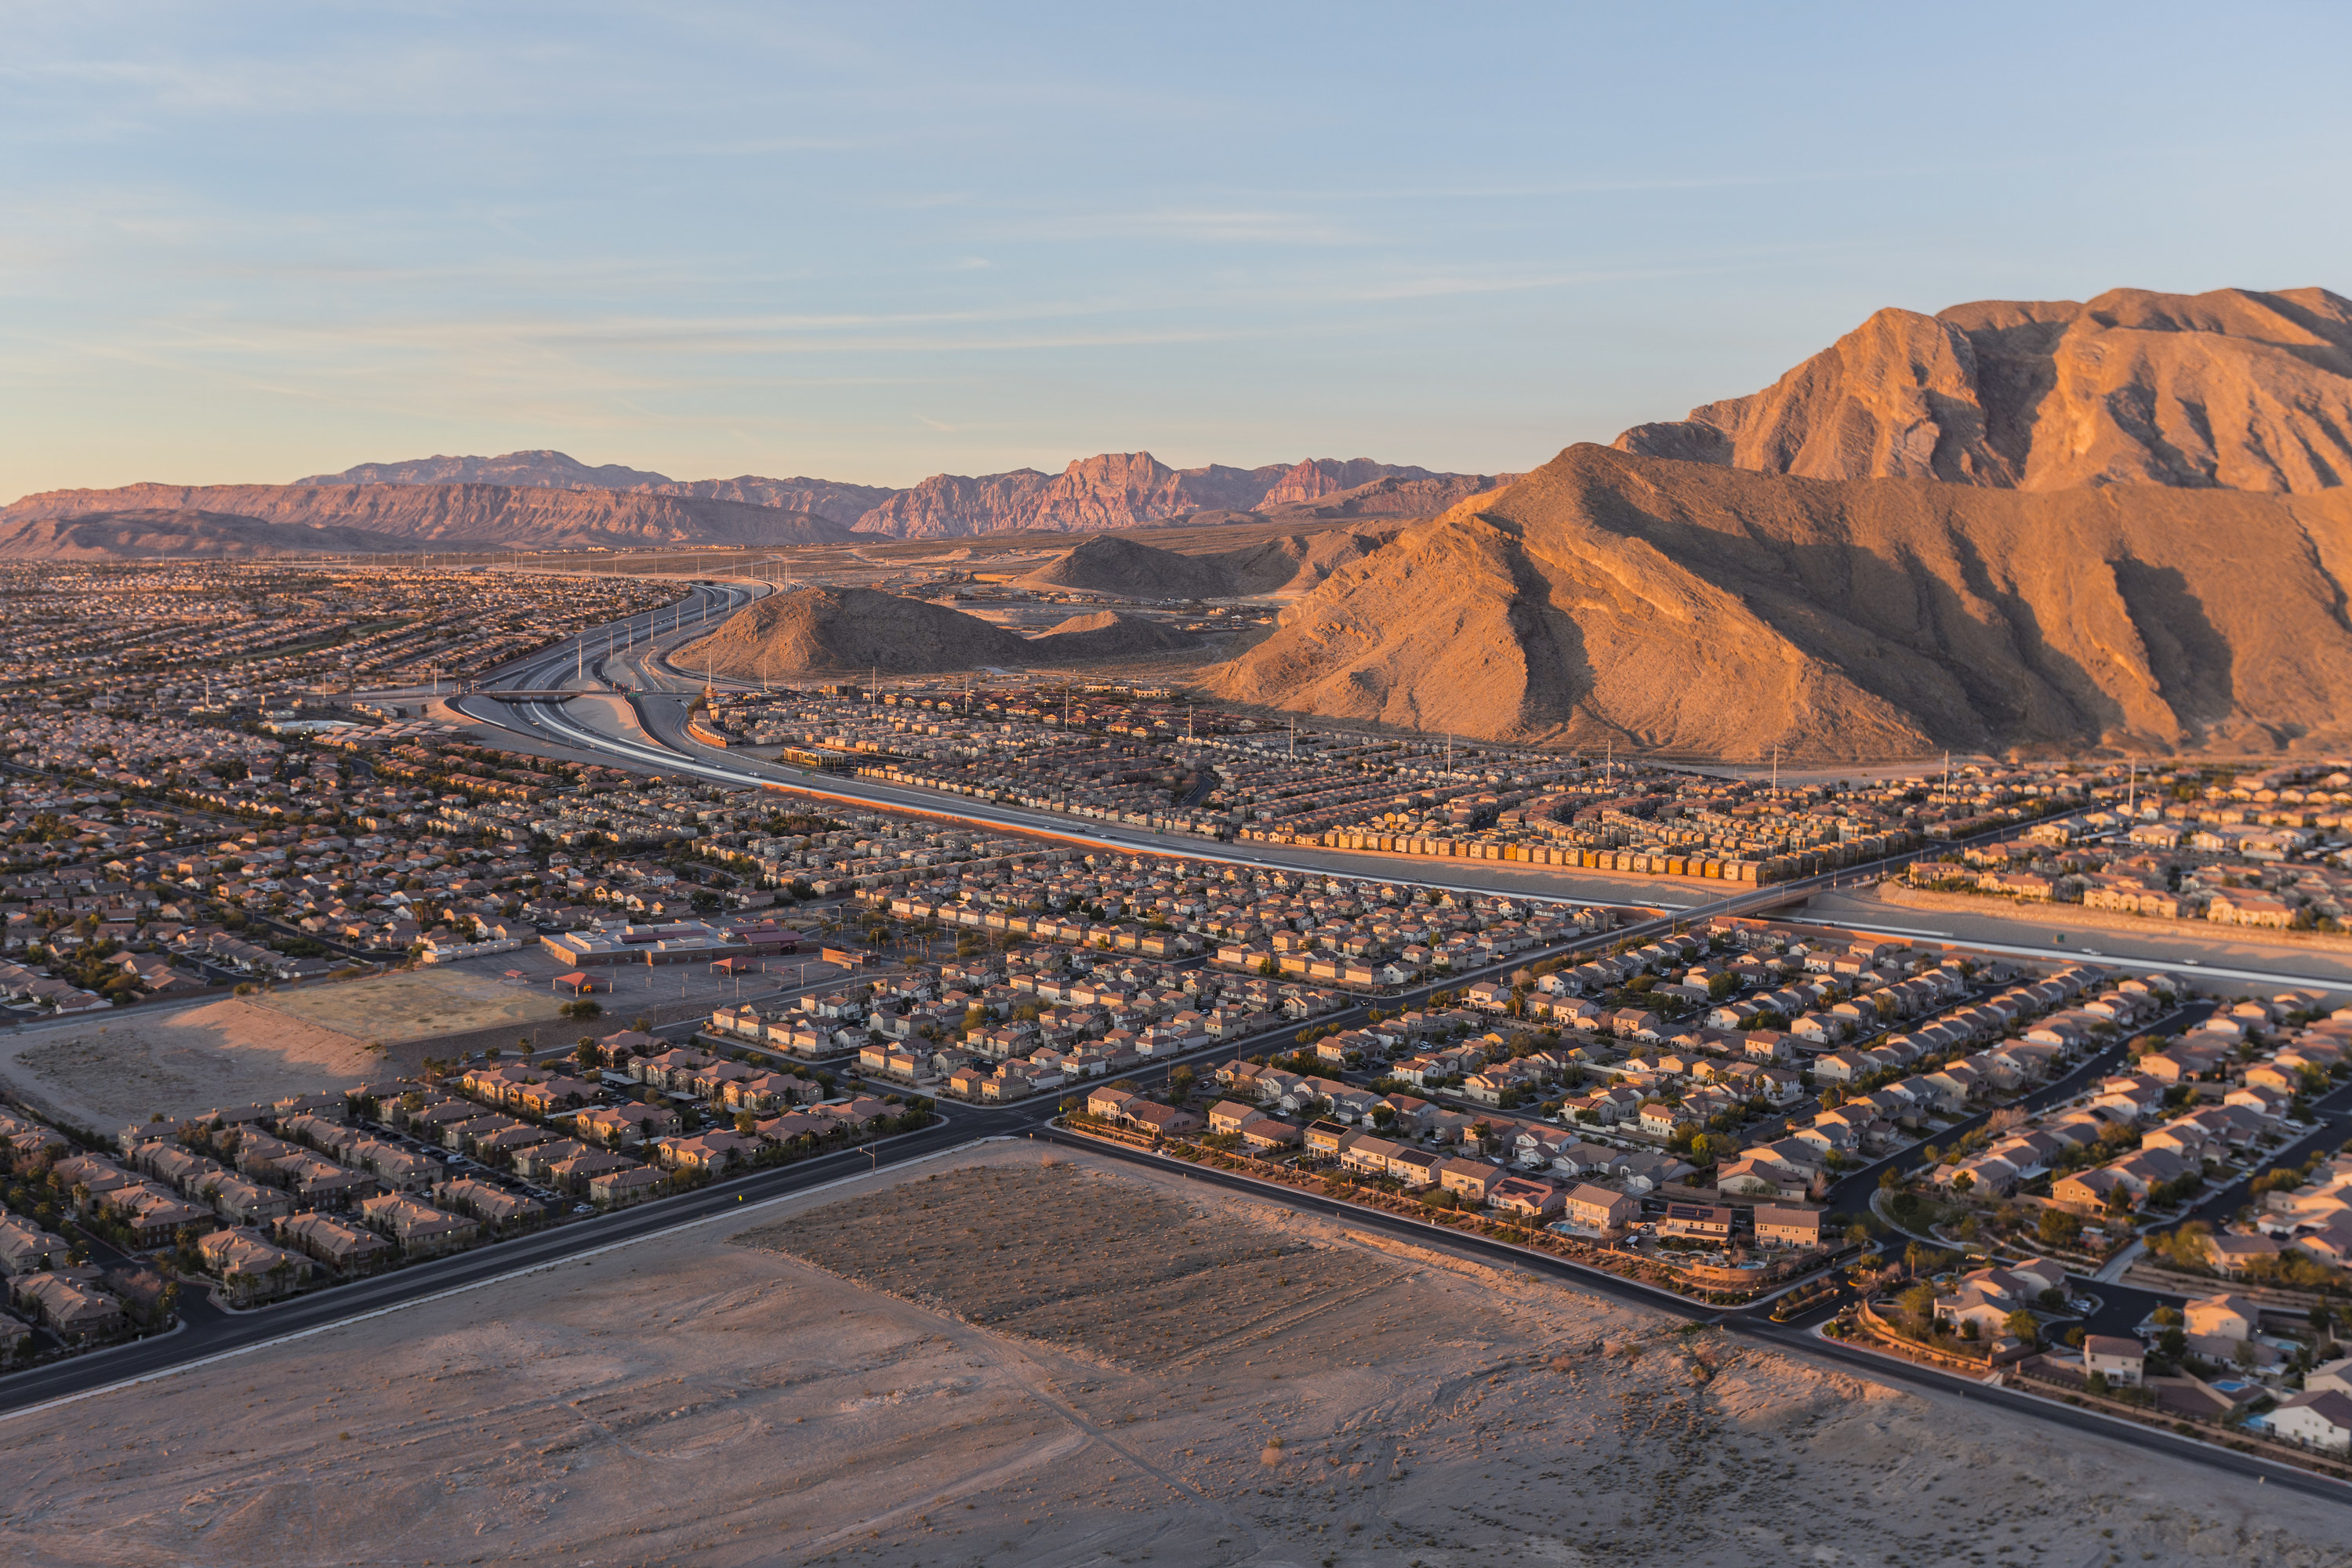 Overhead shot of a suburb of Las Vegas, surrounded by tall, sandy mountains